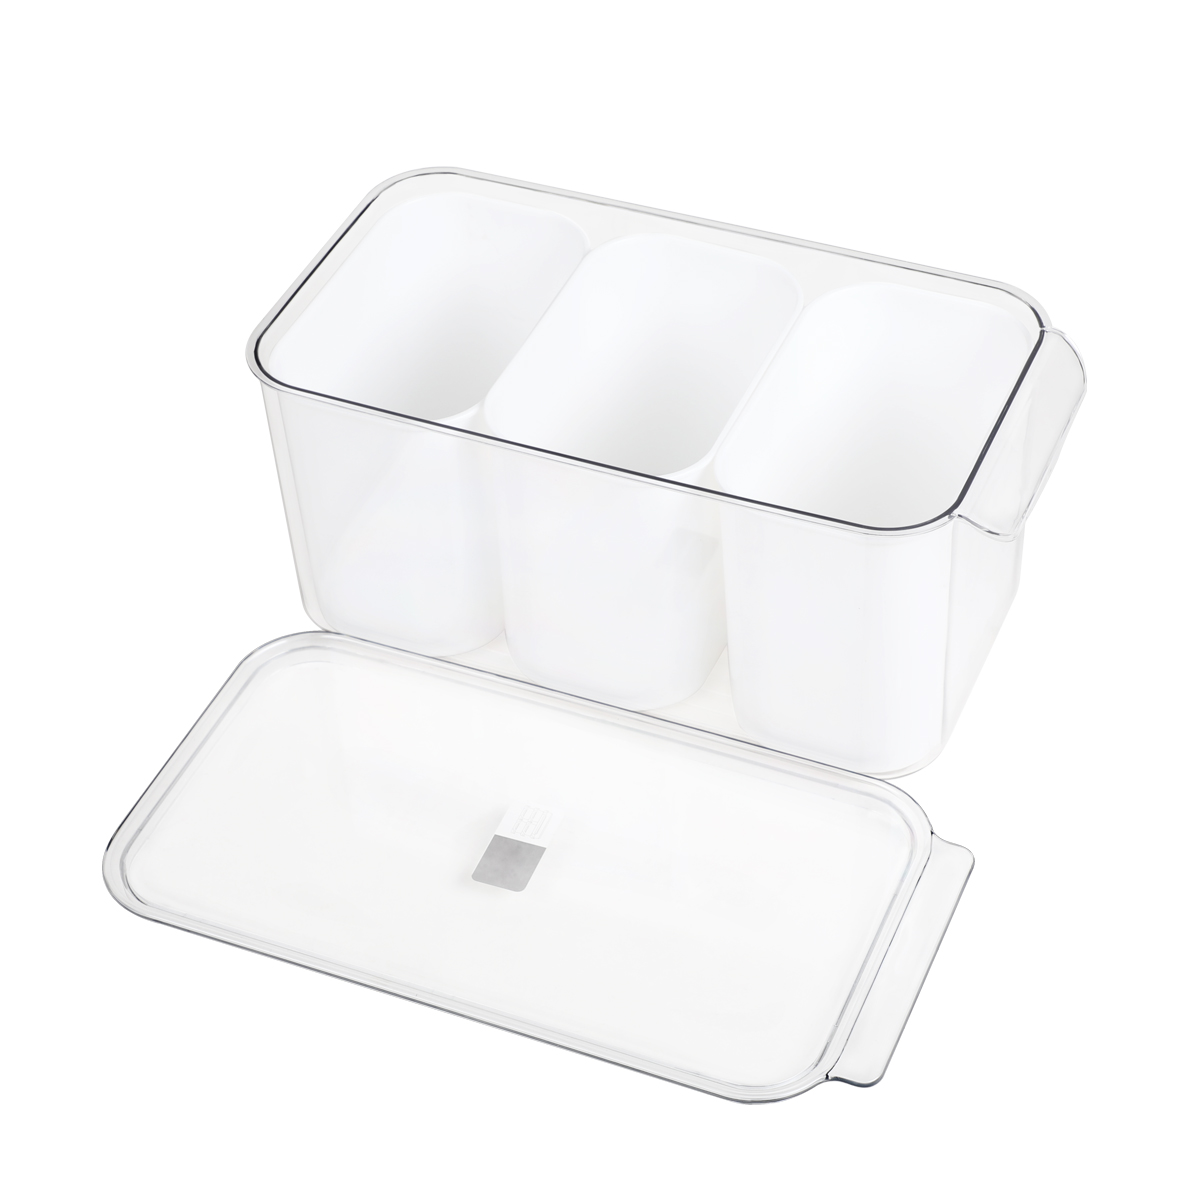 3 Compartments Storage Bins With Lids & Handles 